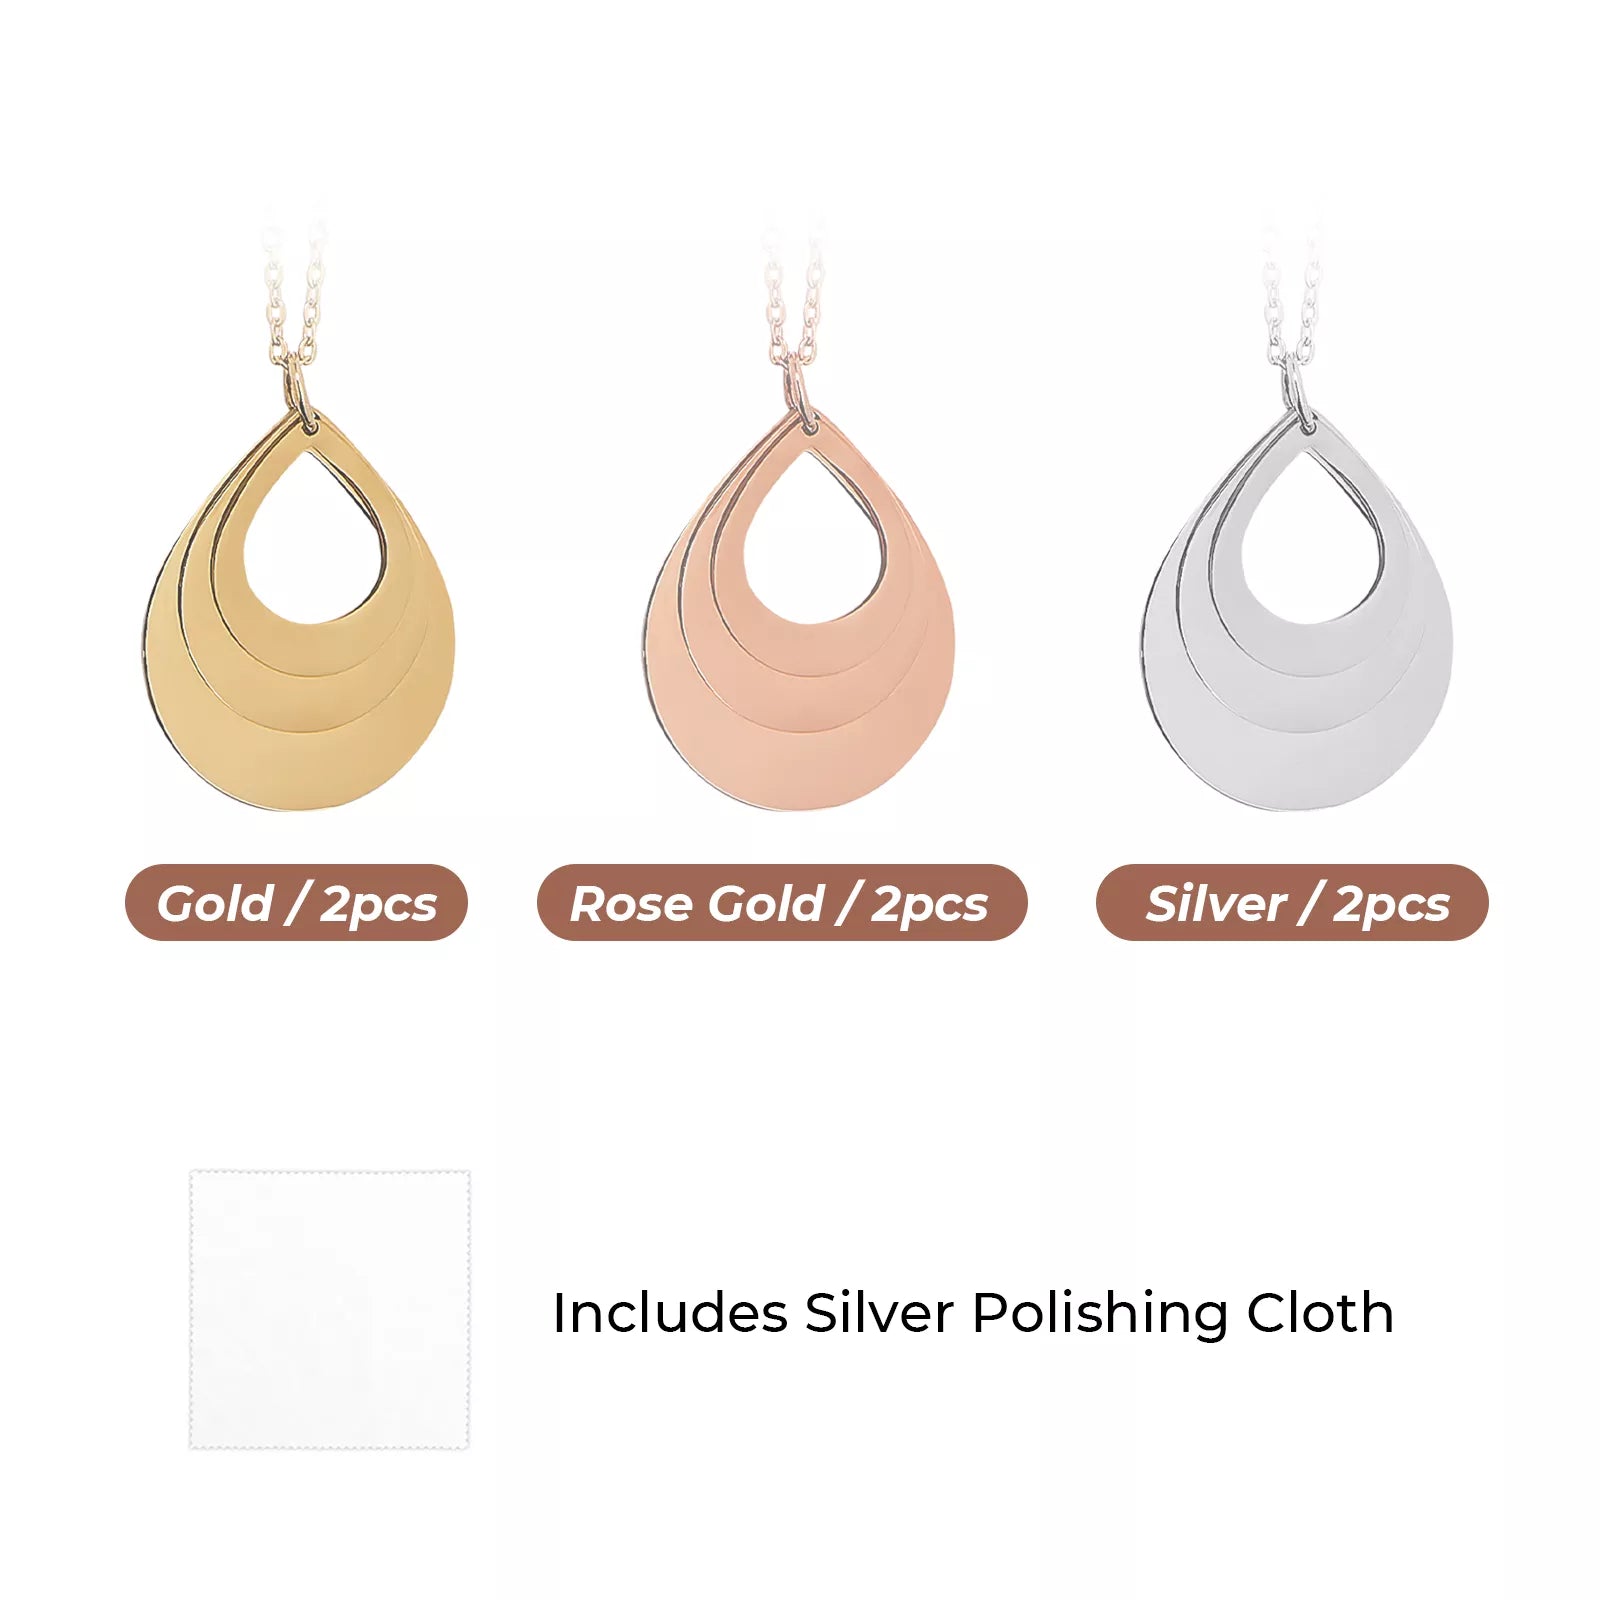 Stainless Steel Water Drop Necklace (6pcs)